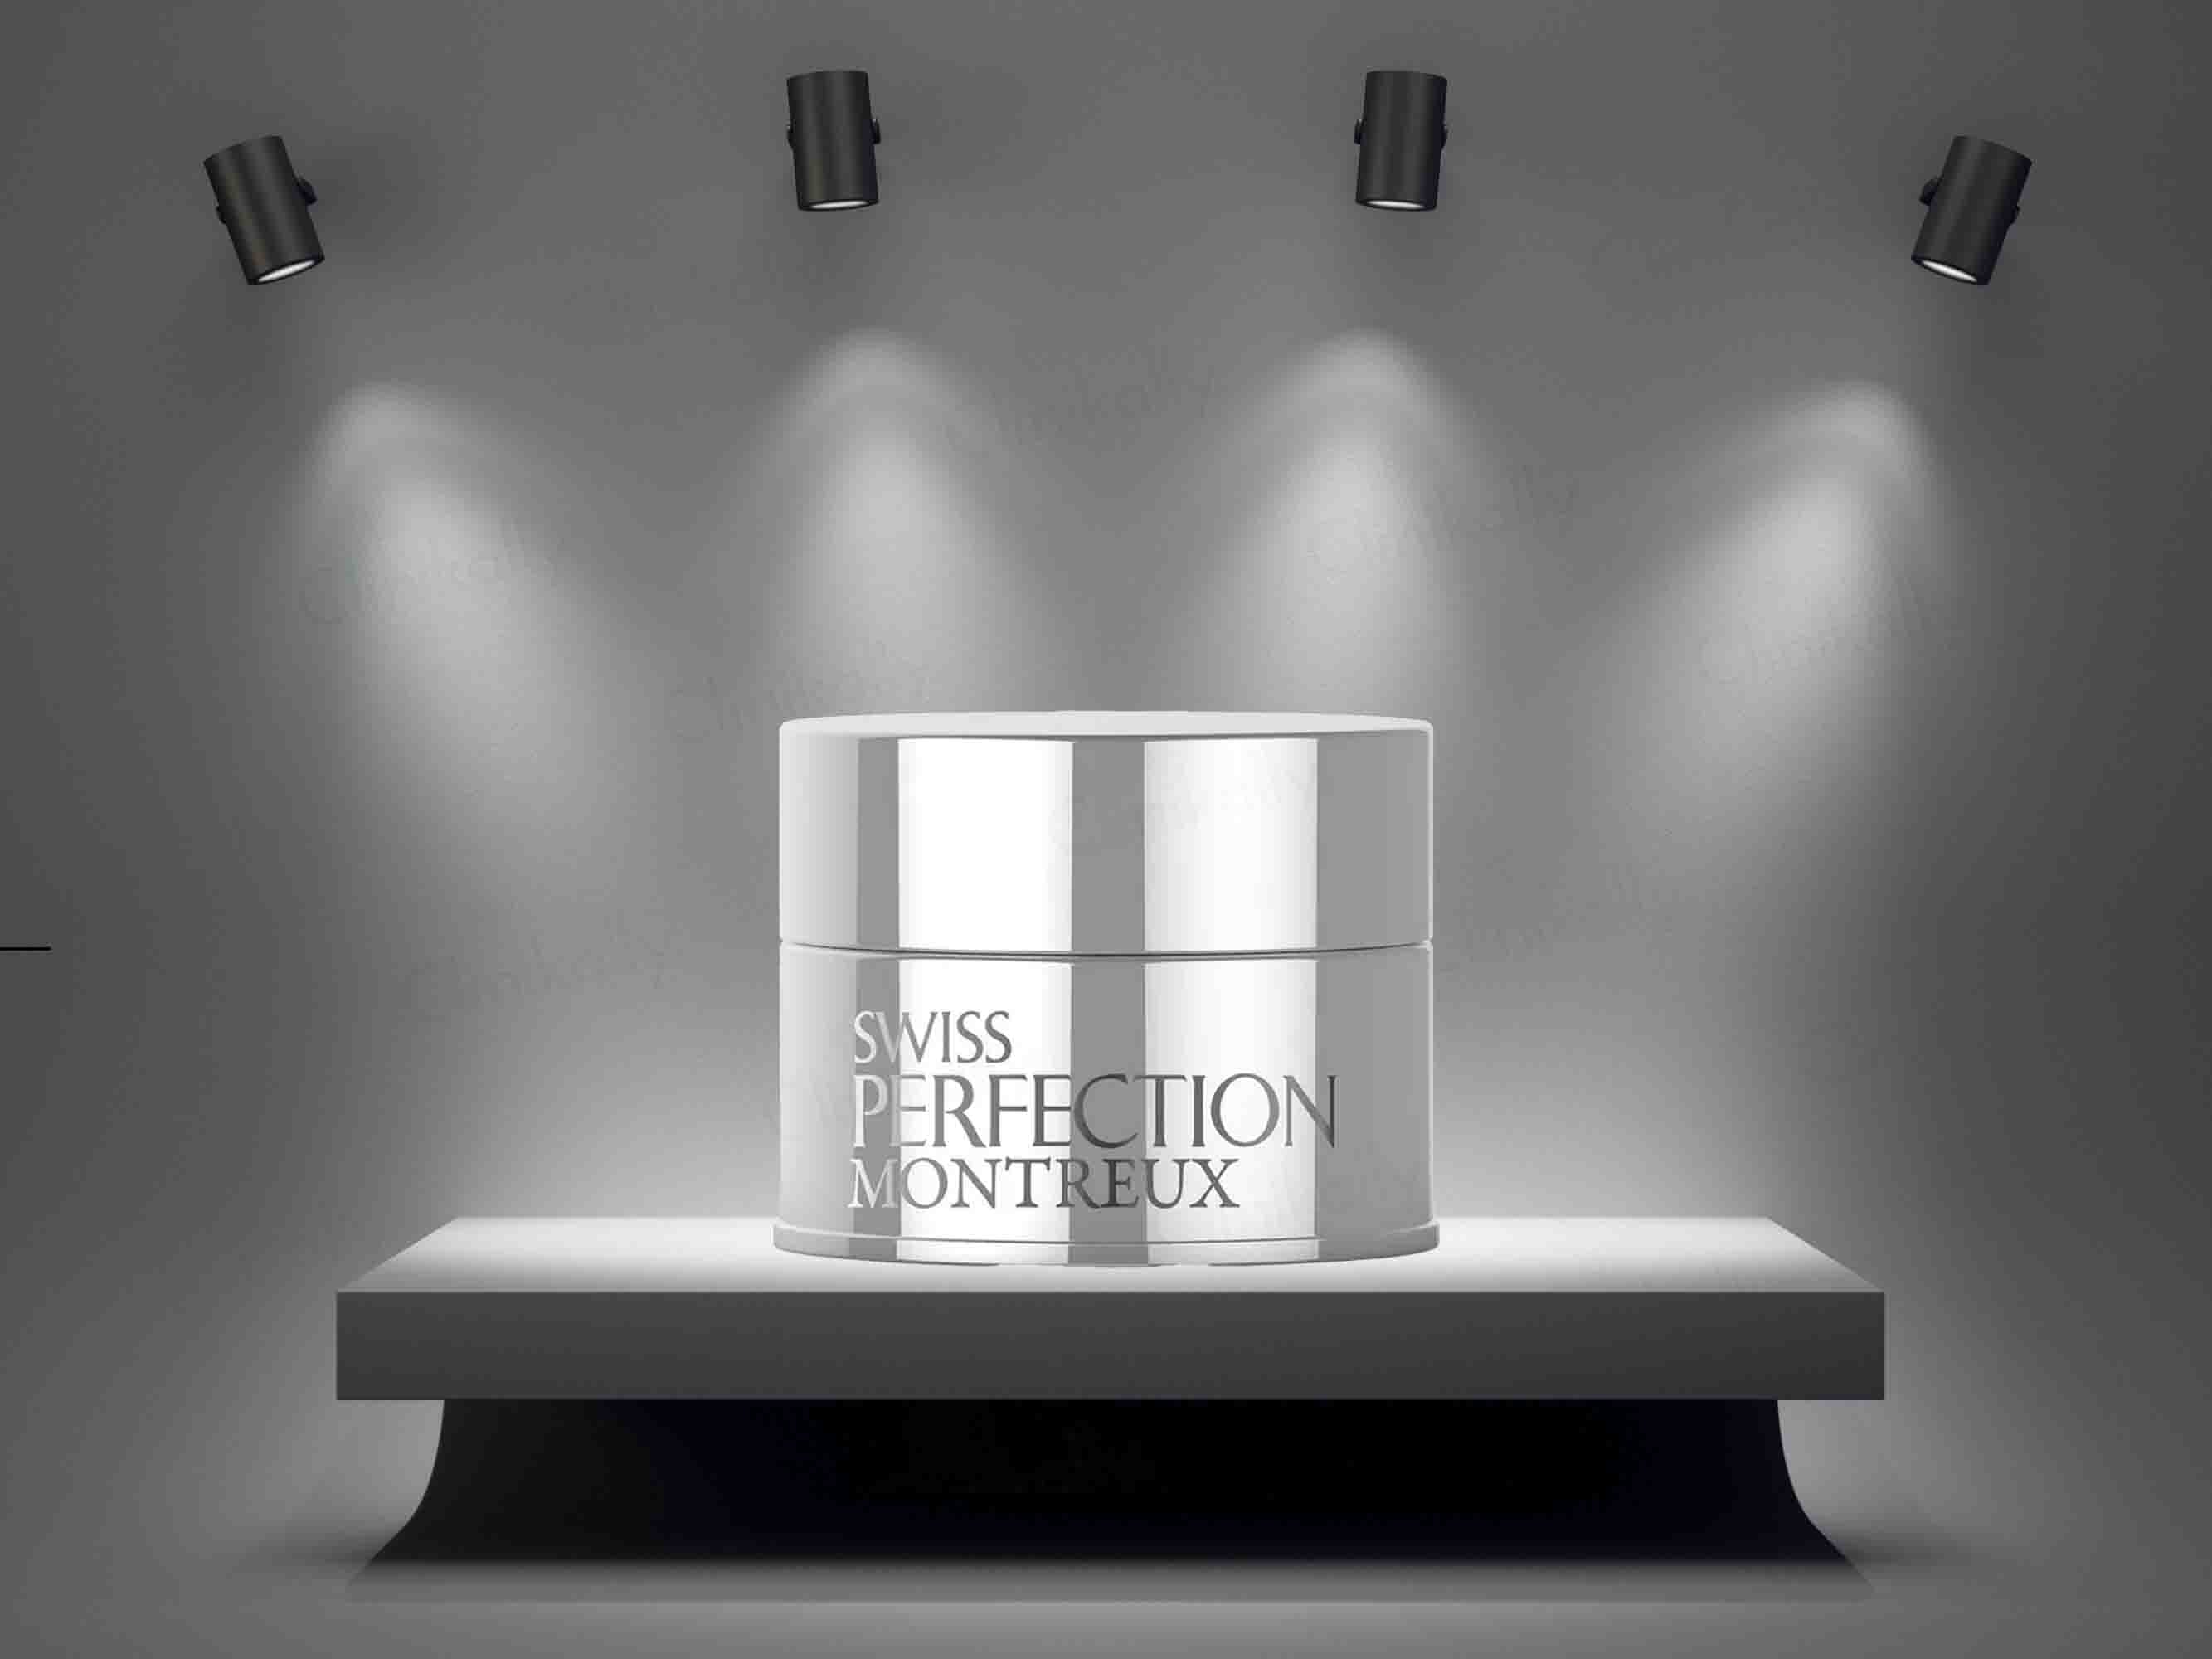 Swiss Perfection Montreux Cellular Perfect Lift Skin Cream